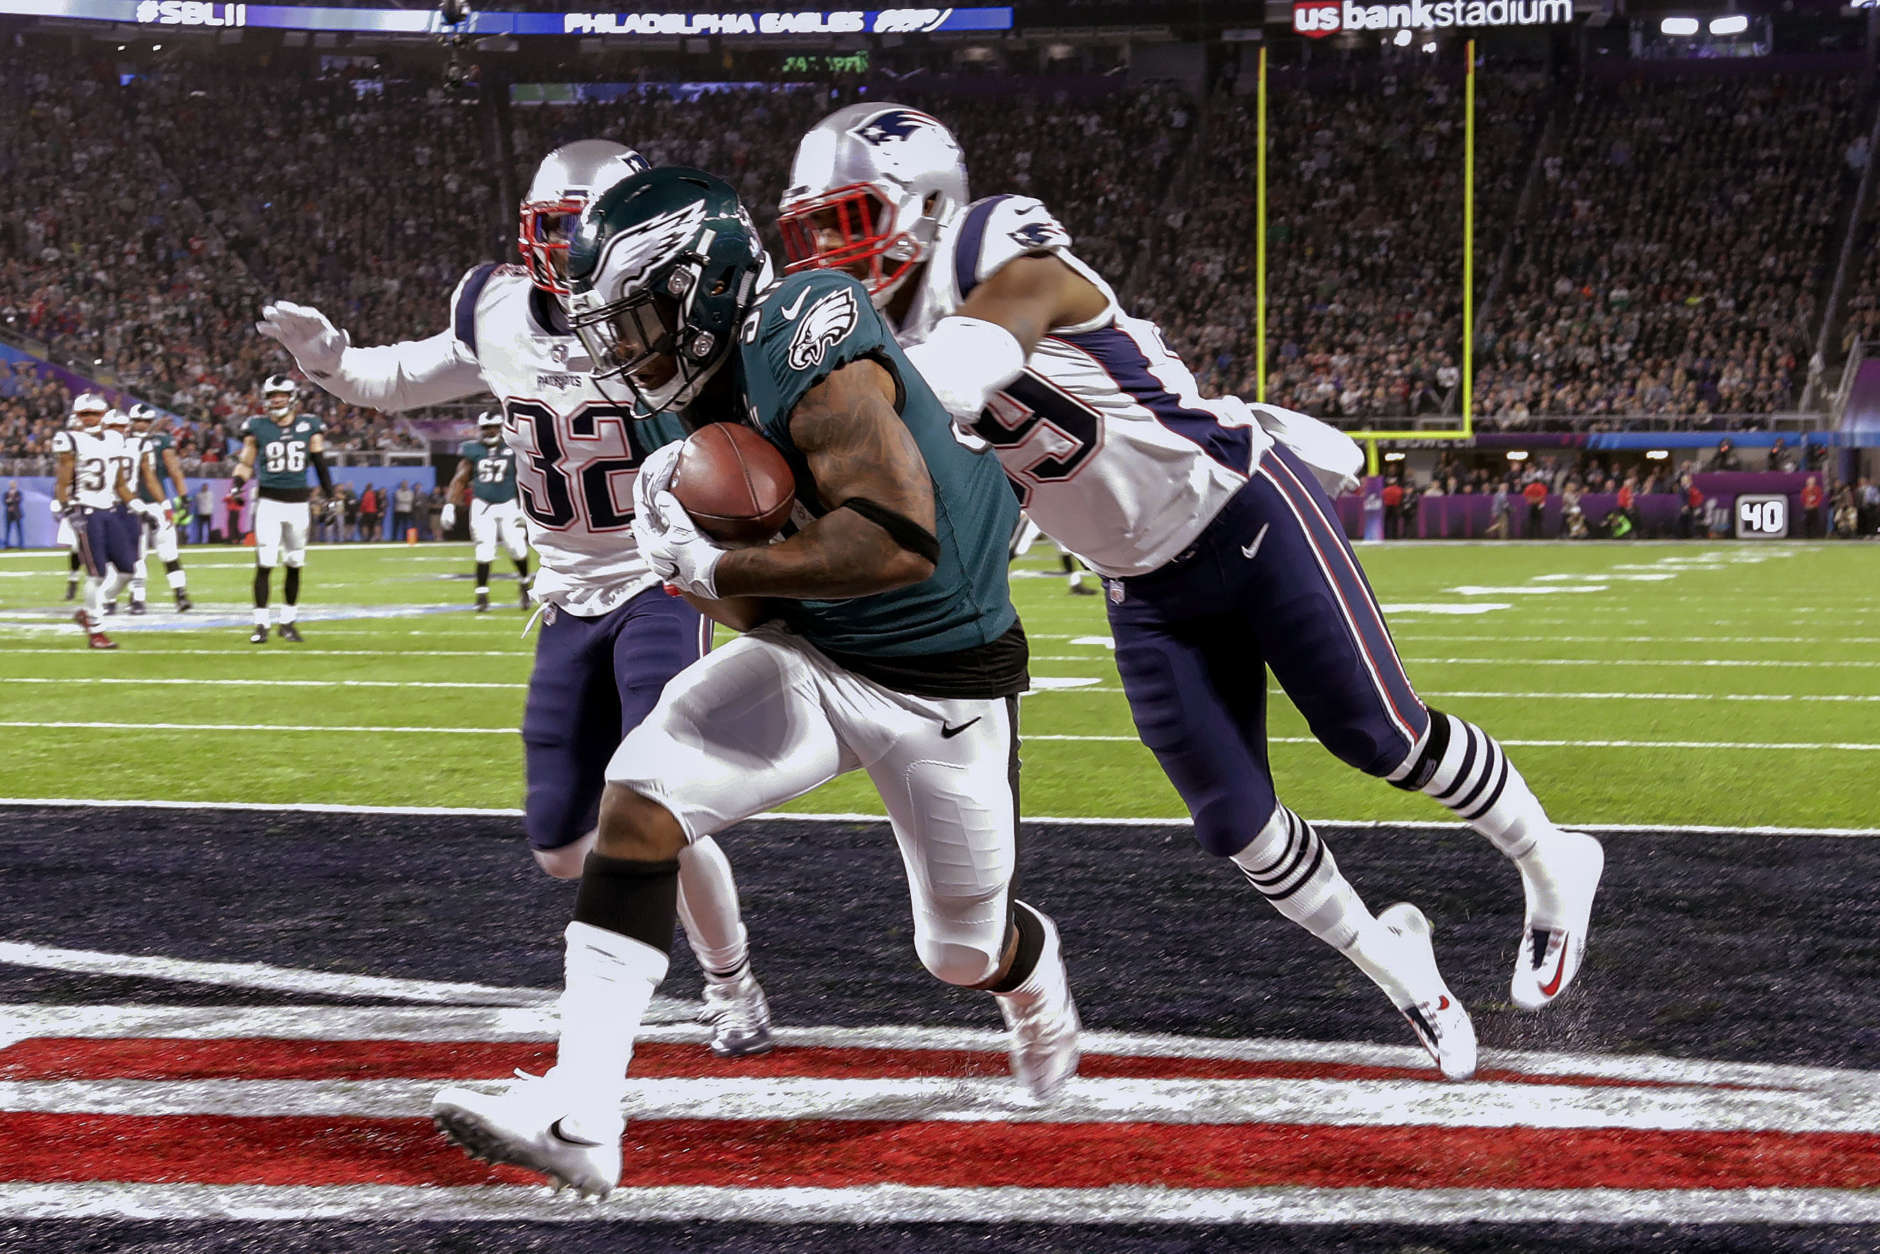 Philadelphia Eagles running back Corey Clement (30) scores a touchdown, as New England Patriots cornerback Johnson Bademosi (29) and free safety Devin McCourty (32) are late with the tackle, during the second half of the NFL Super Bowl 52 football game, Sunday, Feb. 4, 2018, in Minneapolis. (AP Photo/Chris O'Meara)